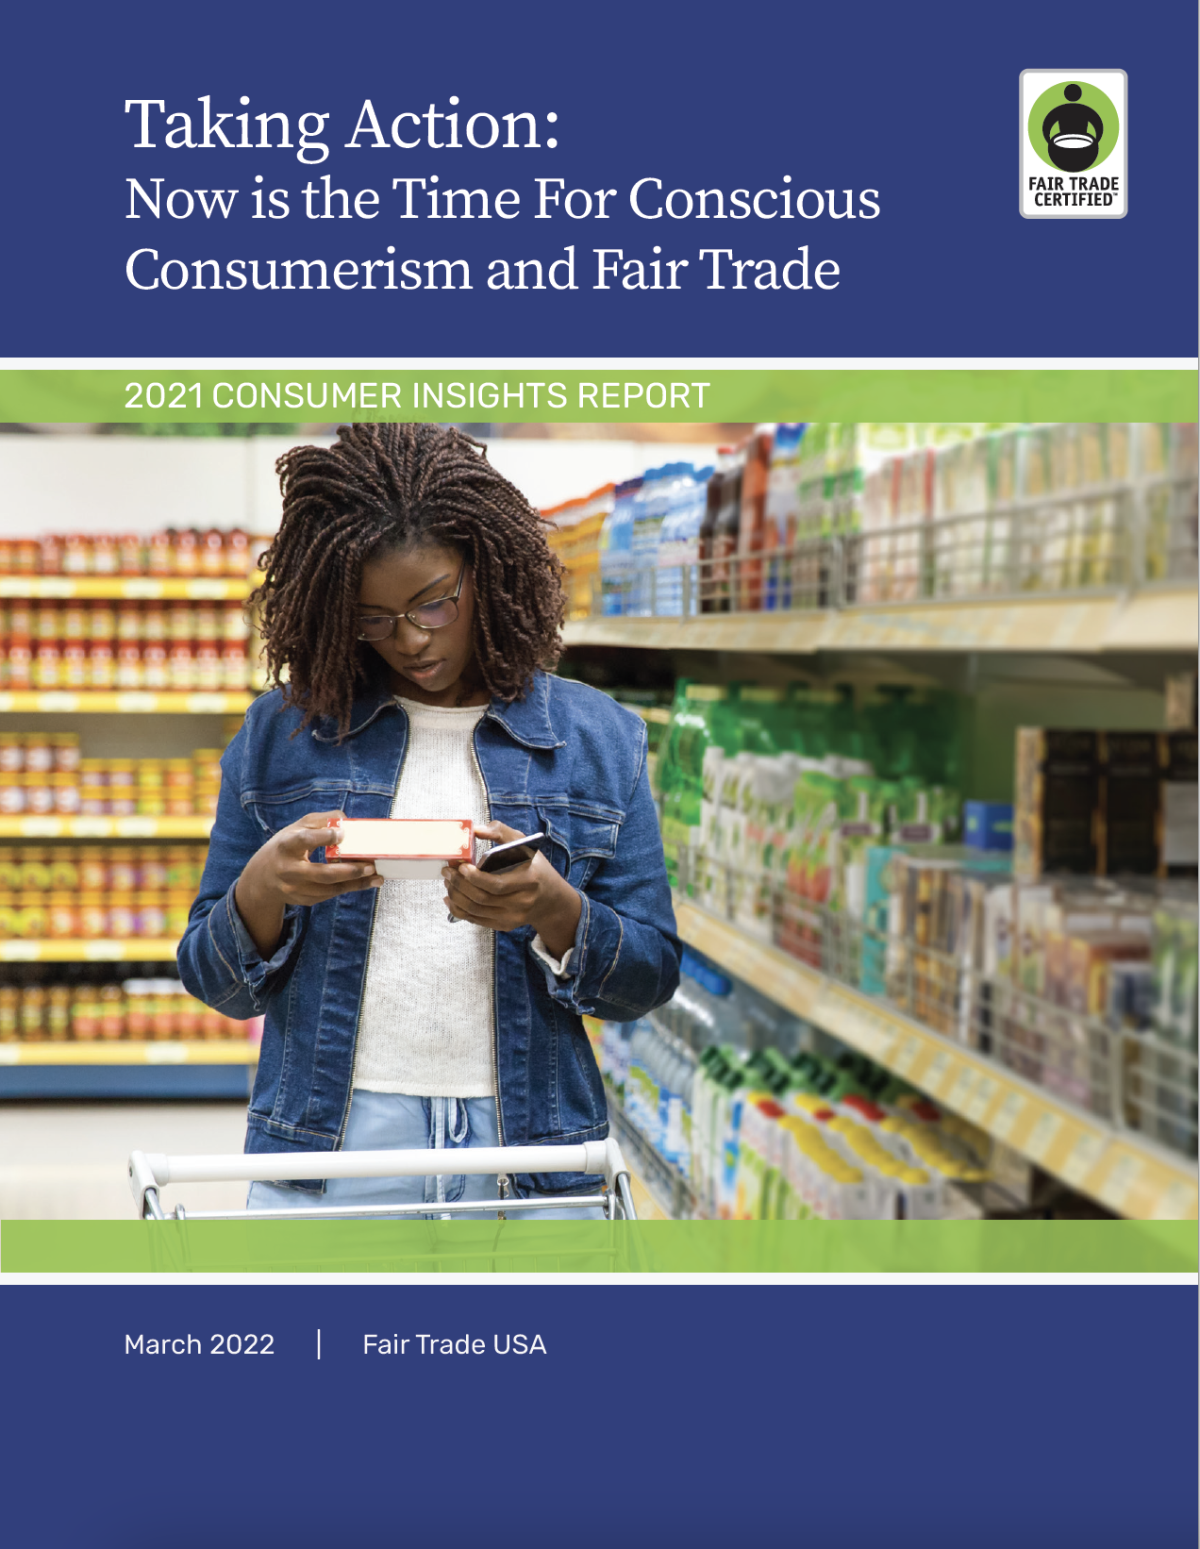 Taking Action: Now is the Time For Conscious Consumerism and Fair Trade. Fair Trade USA. Black woman shown reading a label in a grocery store.